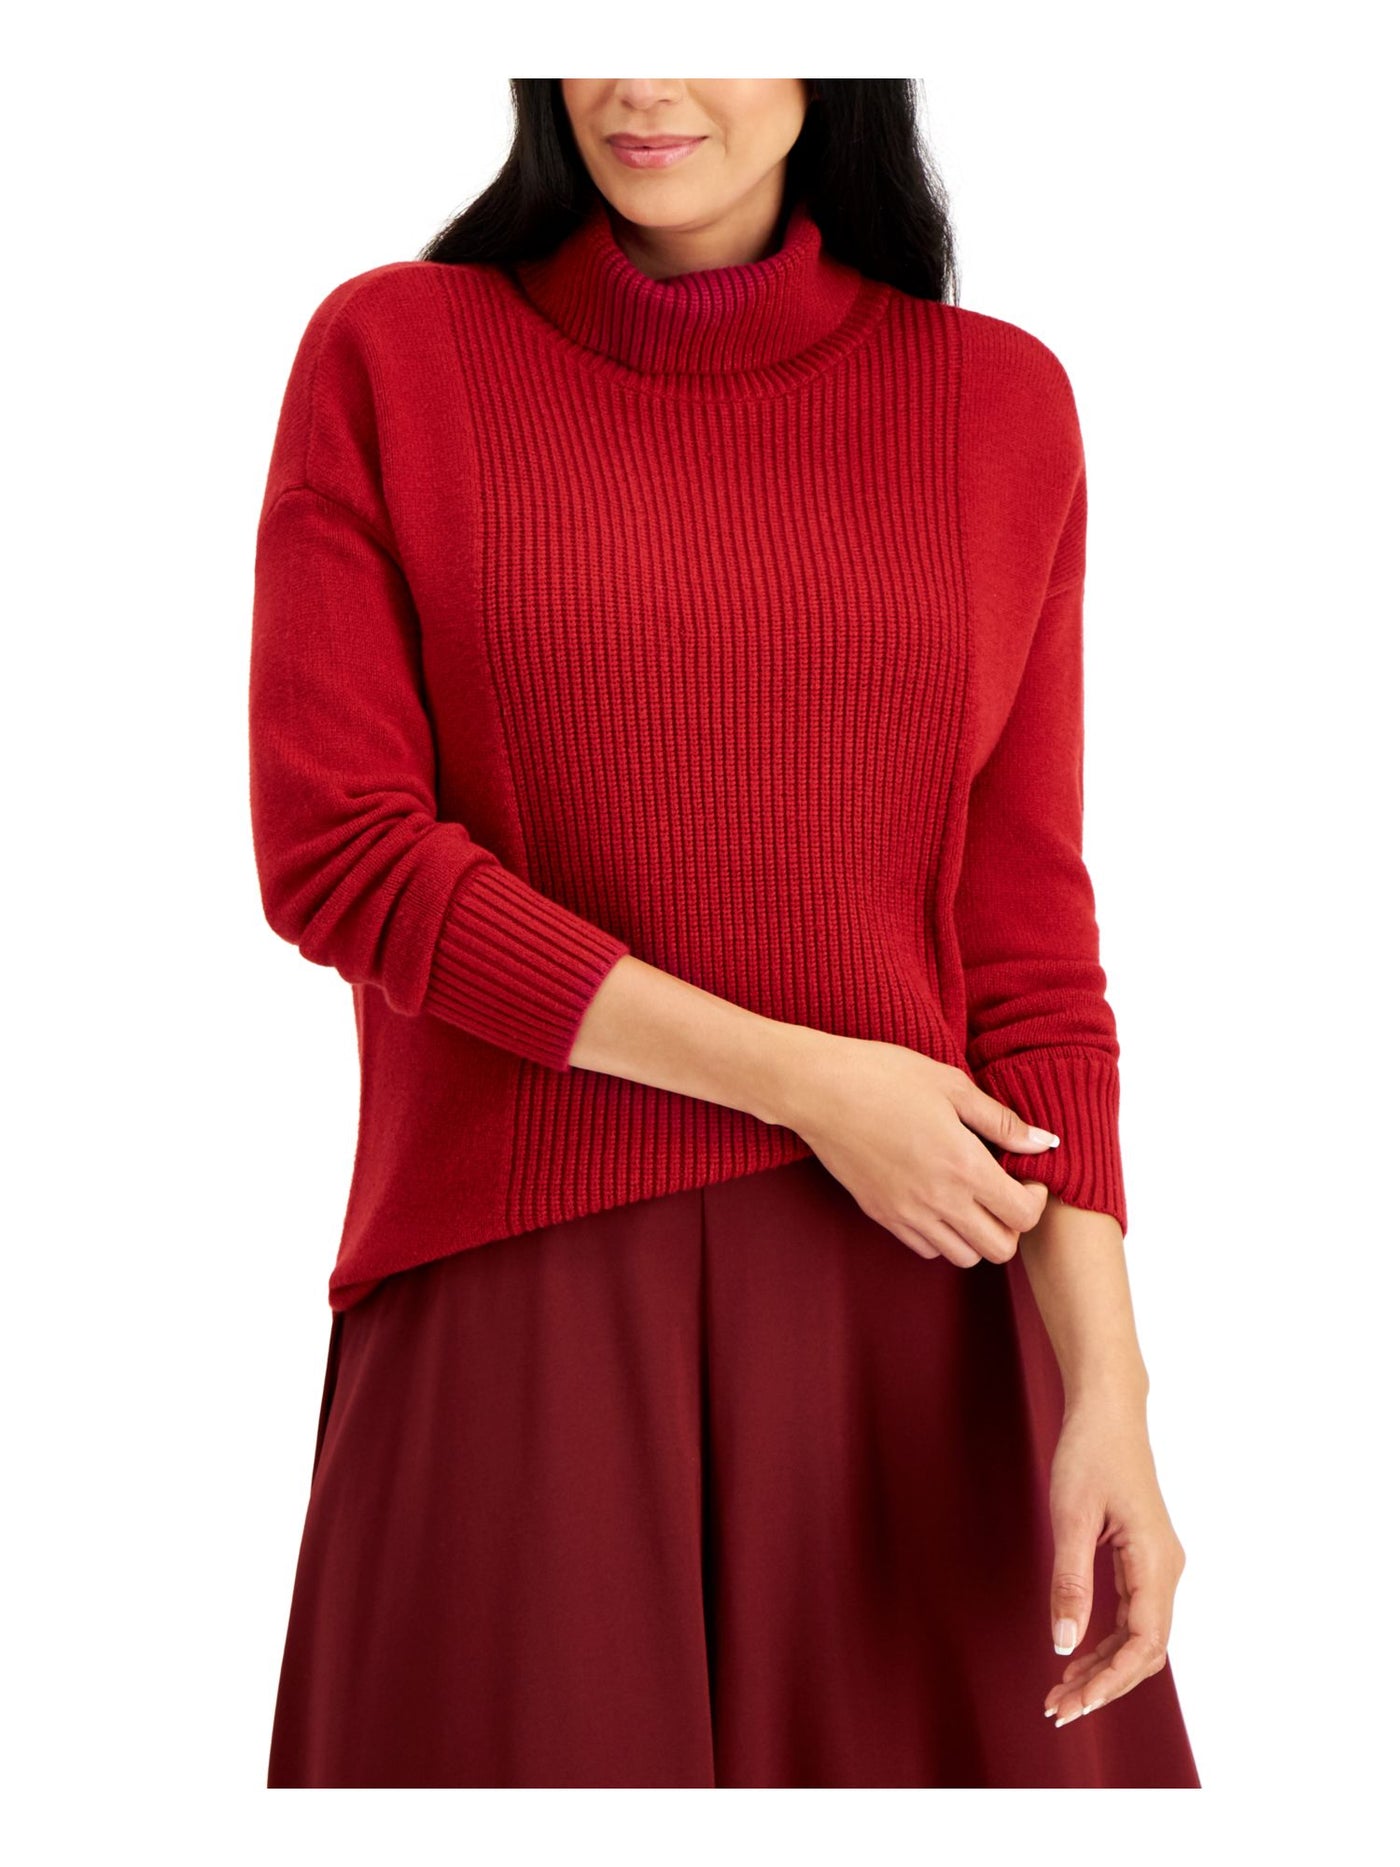 ALFANI Womens Red Long Sleeve Turtle Neck Wear To Work Sweater Petites PP